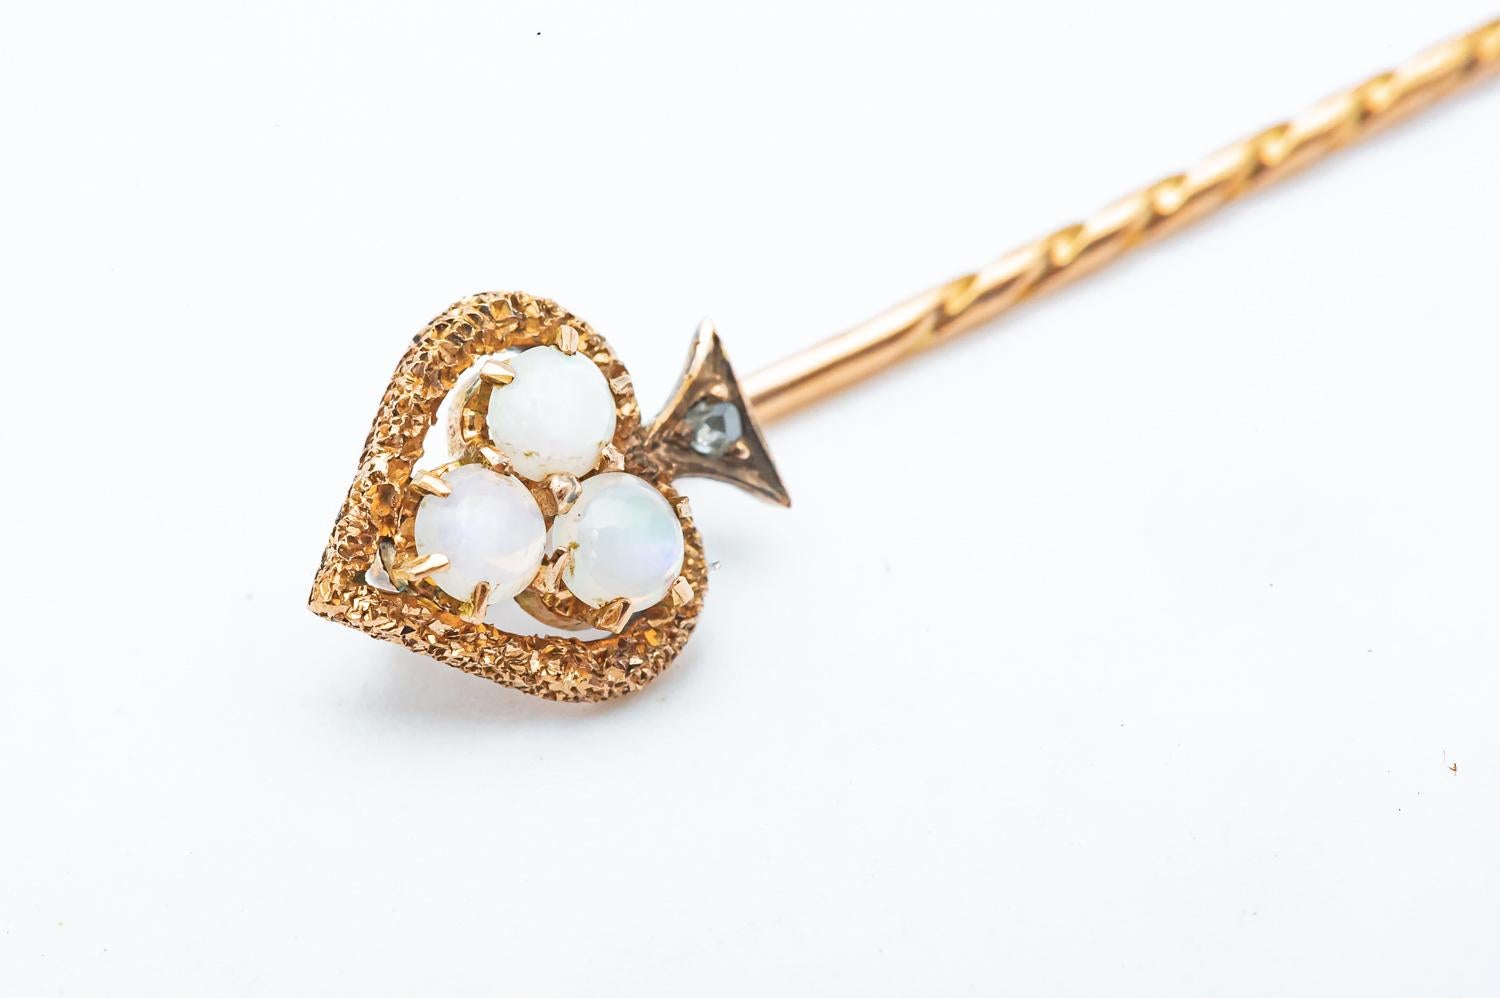 Discover the retro charm and timeless elegance of this antique brooch in 18-carat Rose Gold, magnificently adorned with three round-cut opals. With its distinctive Spade shape and delicately brushed Rose Gold around the edges, this brooch is a truly